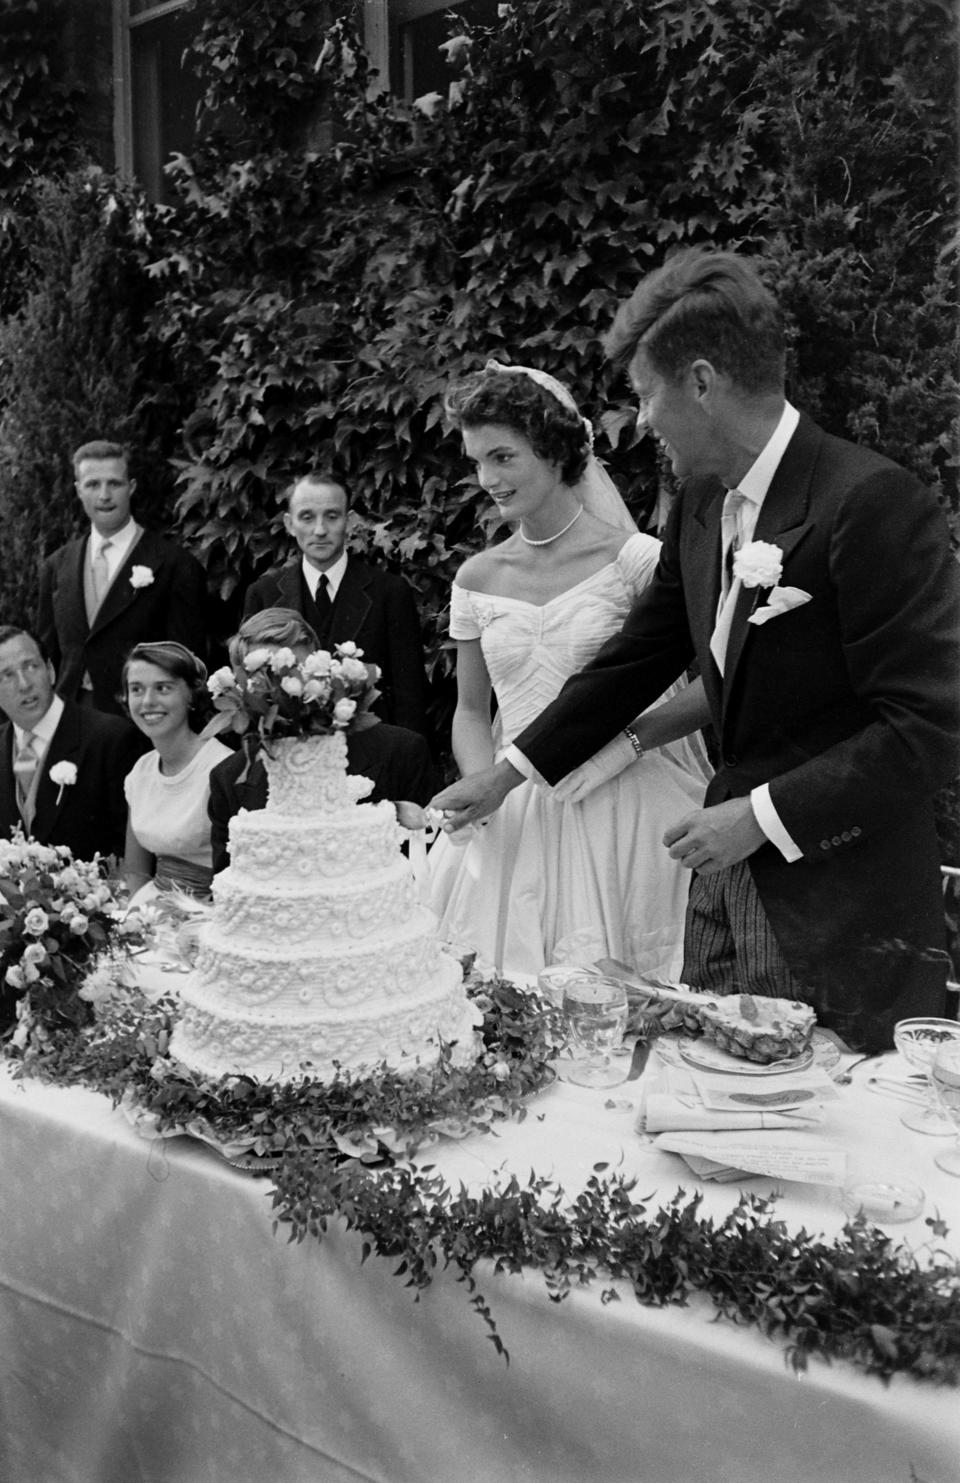 Future US President John F Kennedy (1917 - 1963) and Jacqueline Kennedy (1929 - 1994) (in a Battenburg wedding dress) hold hands as they cut the cake at their wedding reception, Newport, Rhode Island, September 12, 1953. (Photo by Lisa Larsen/Time & Life Pictures/Getty Images)